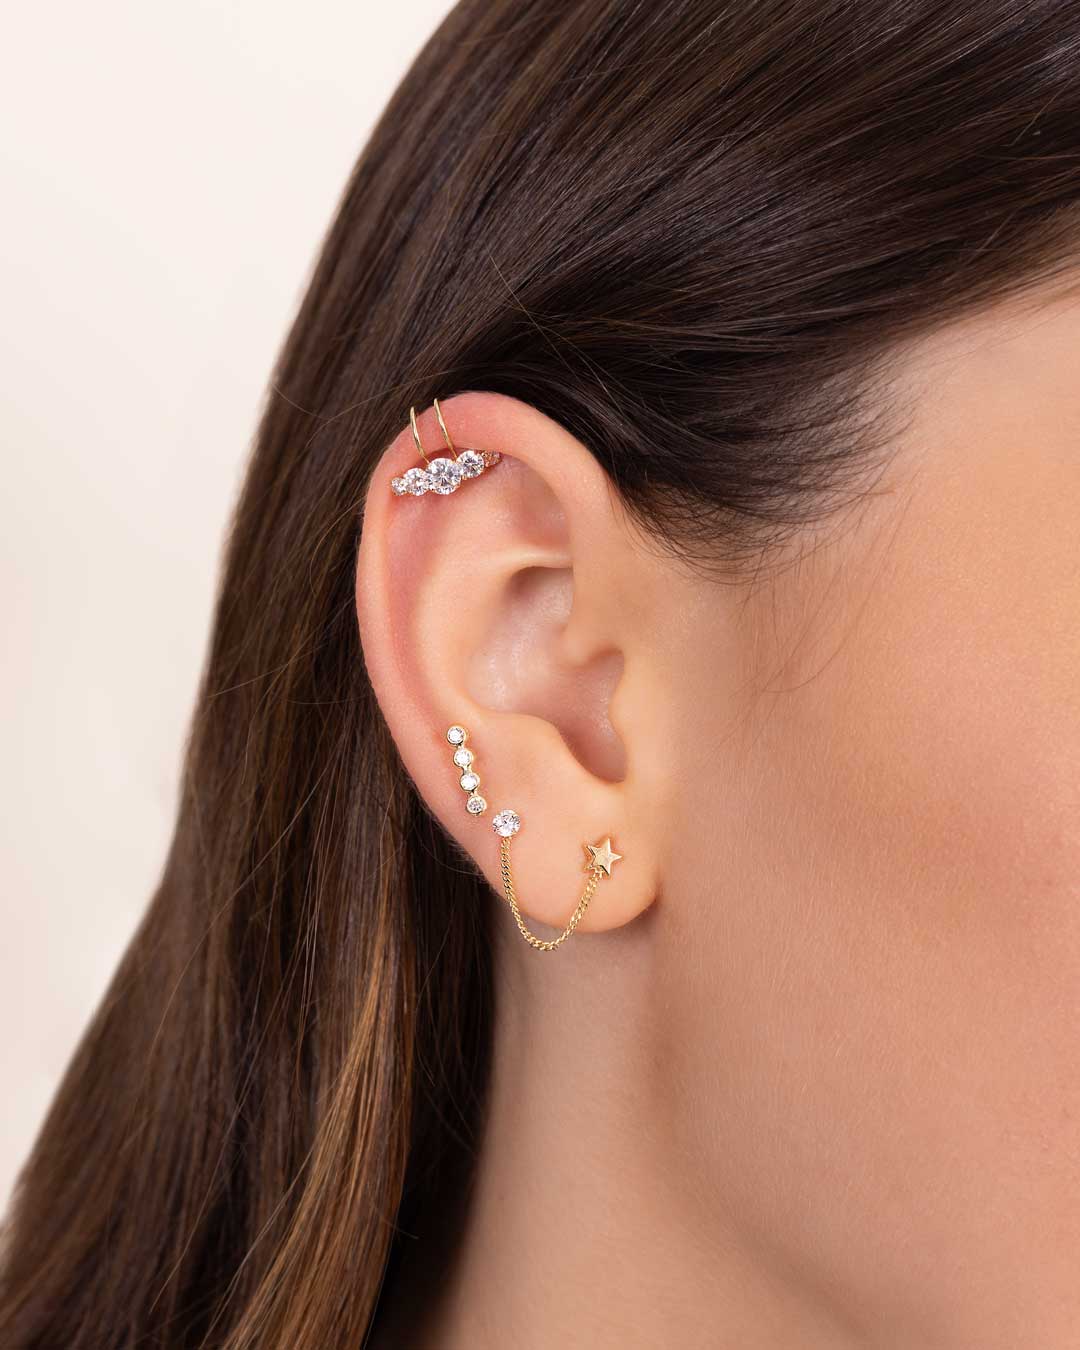 14K GOLD SINGLE PIERCING WITH CRYSTALS